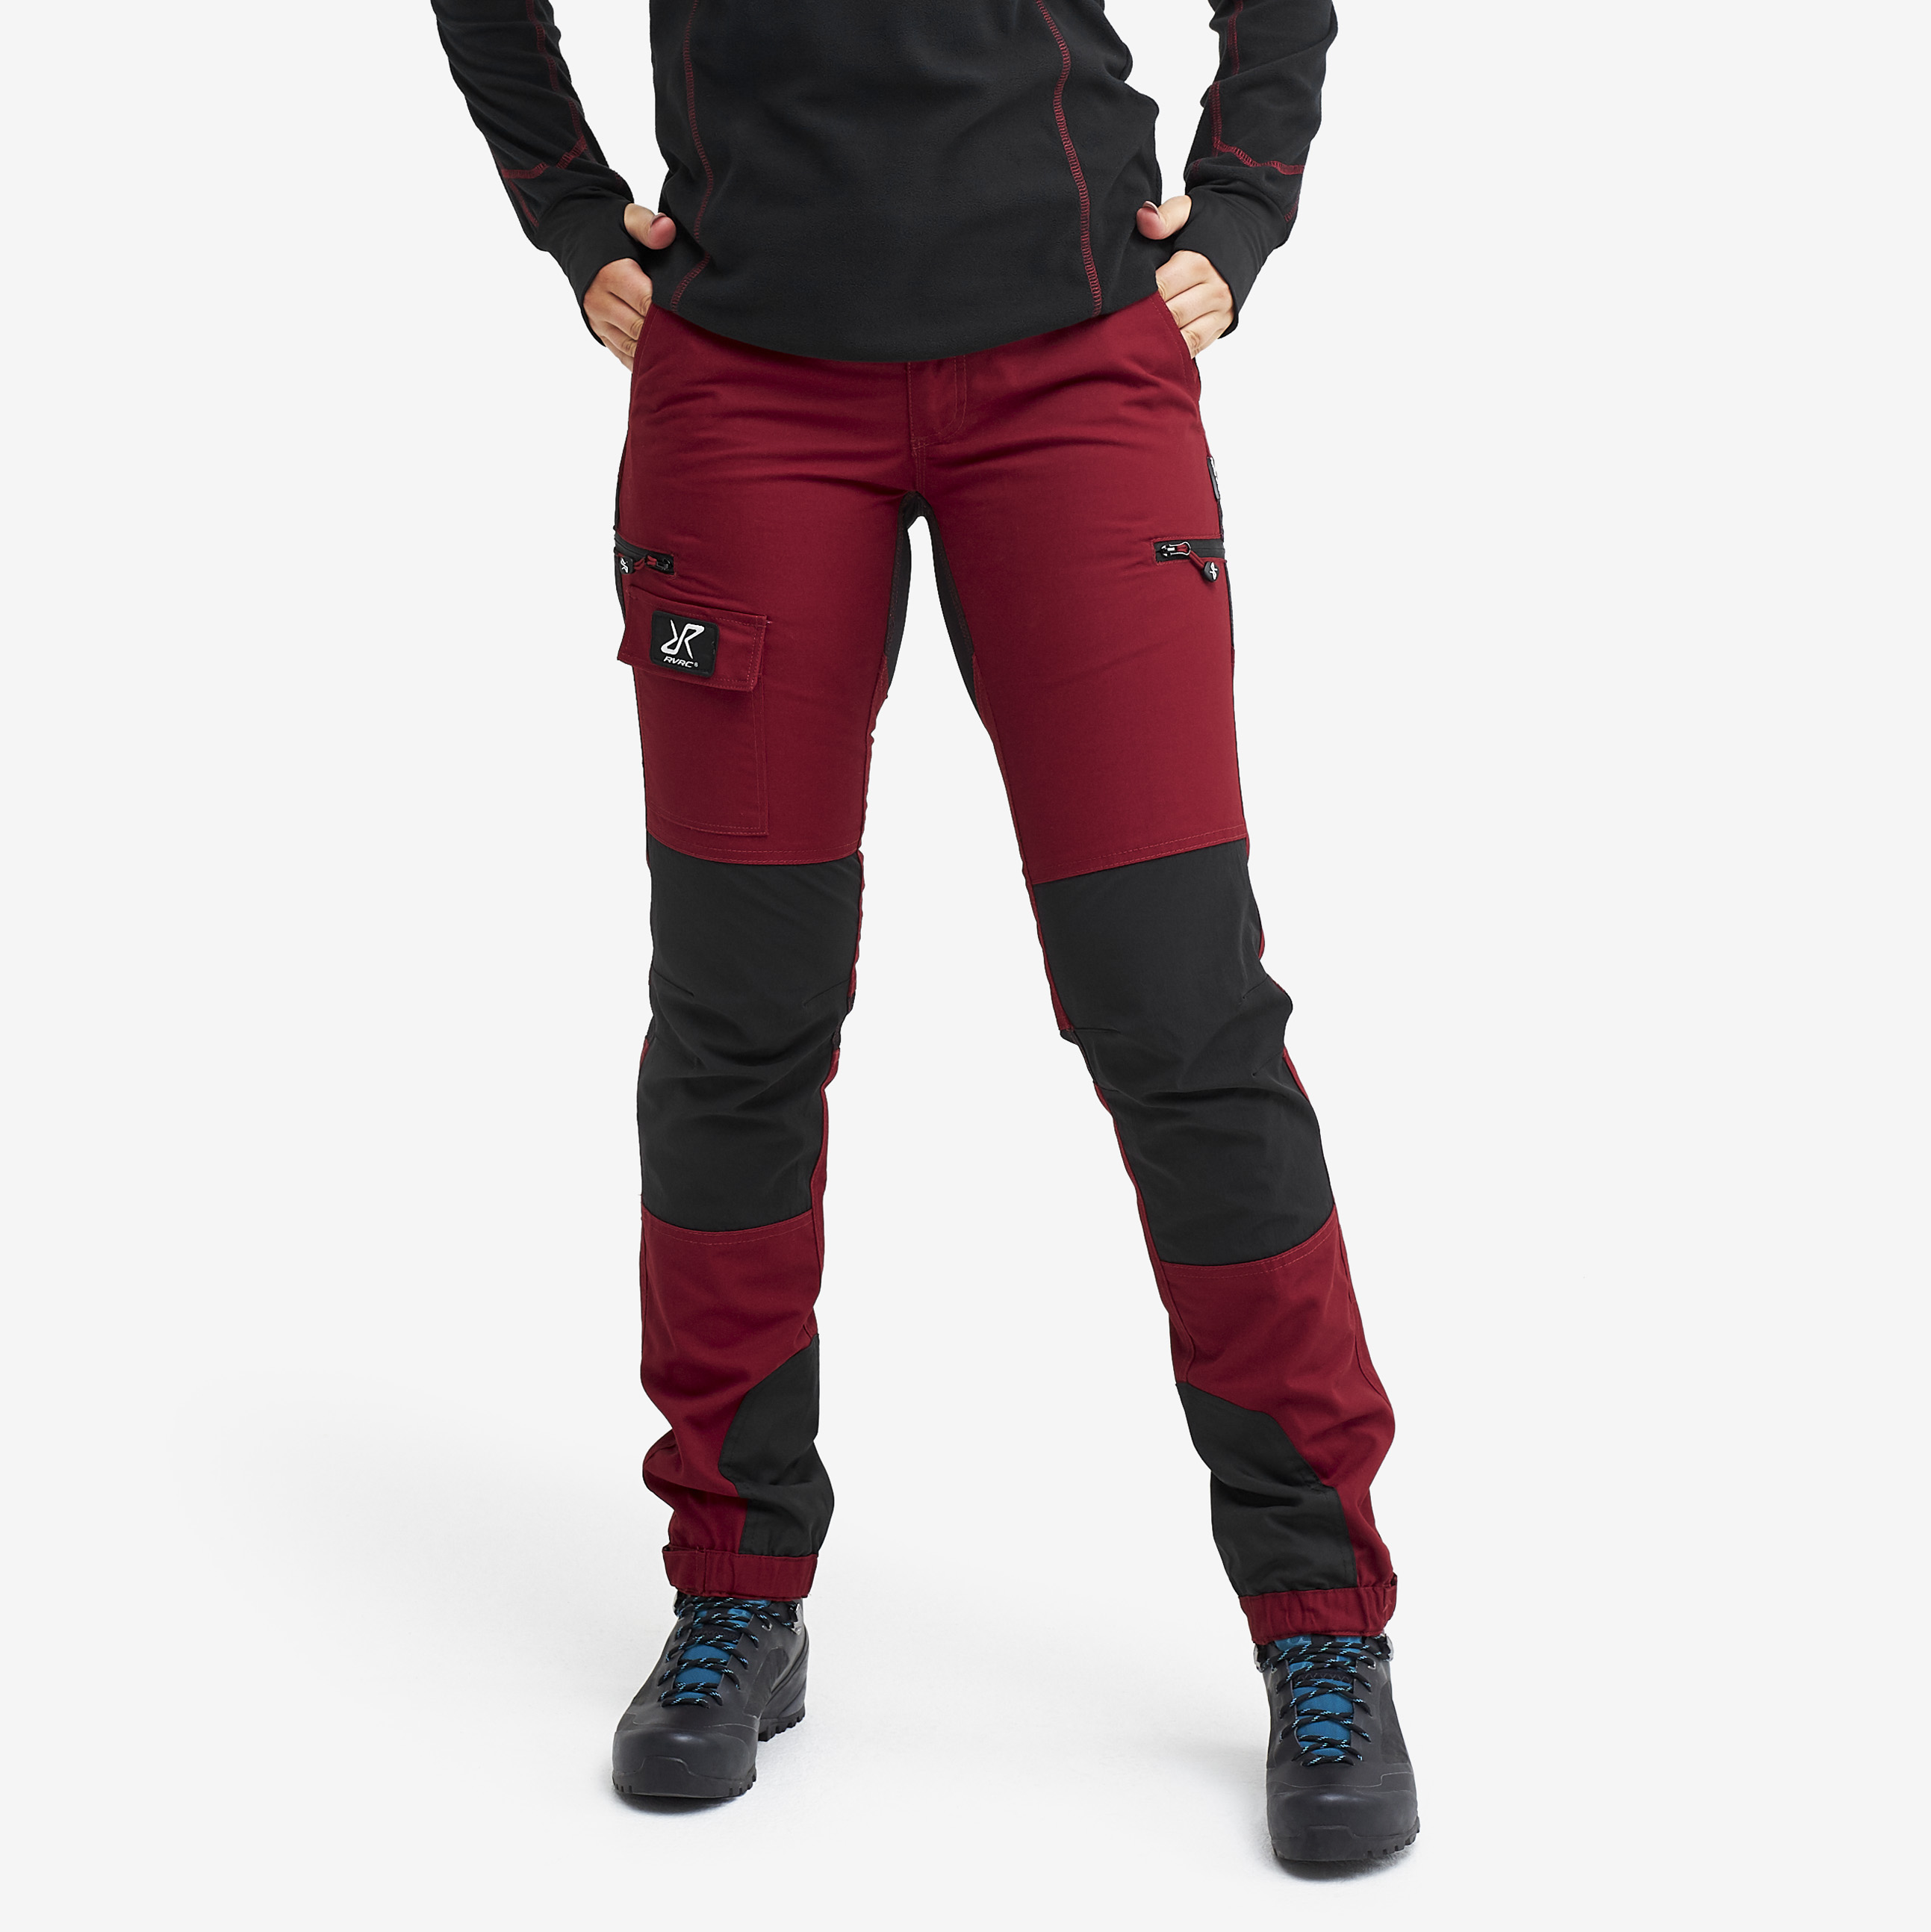 Nordwand outdoor pants for women in red